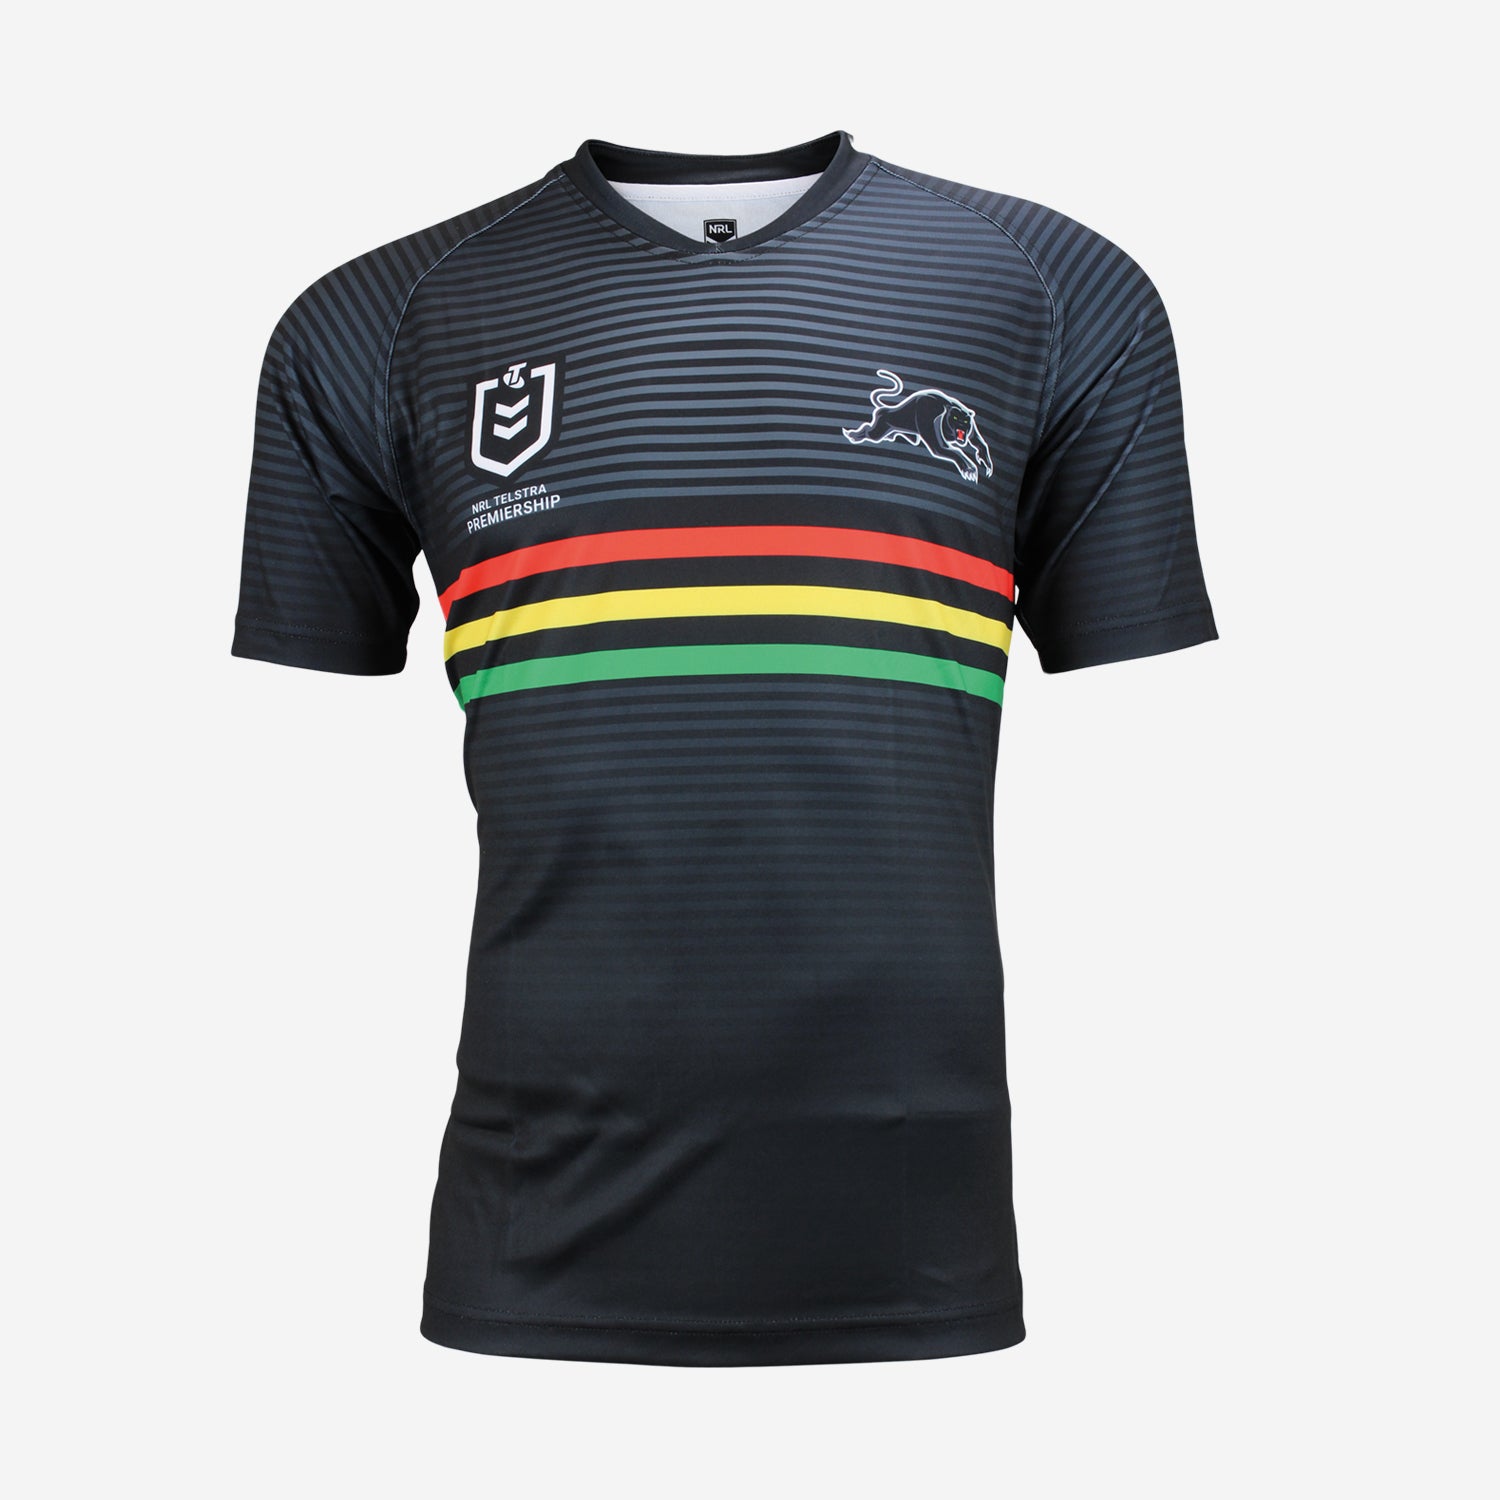 Panthers Retro Jersey, Raiders Rugby Jersey